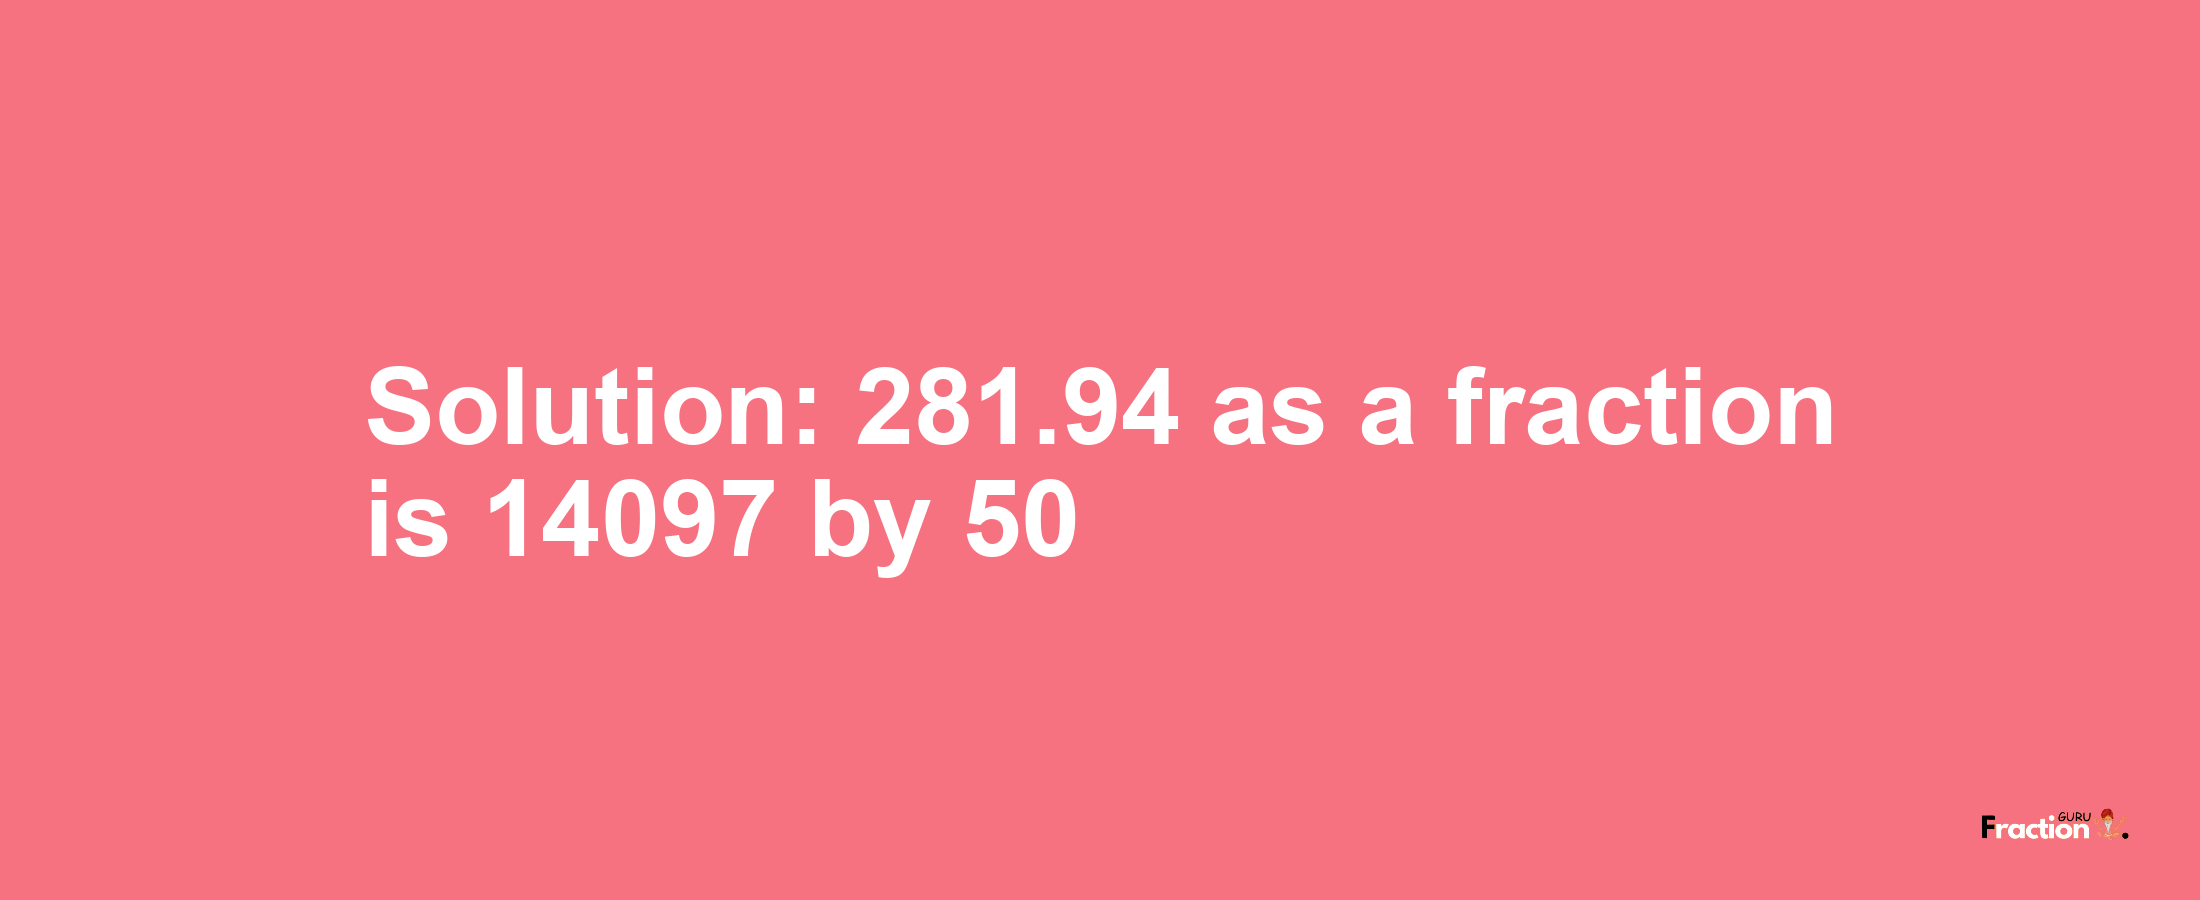 Solution:281.94 as a fraction is 14097/50